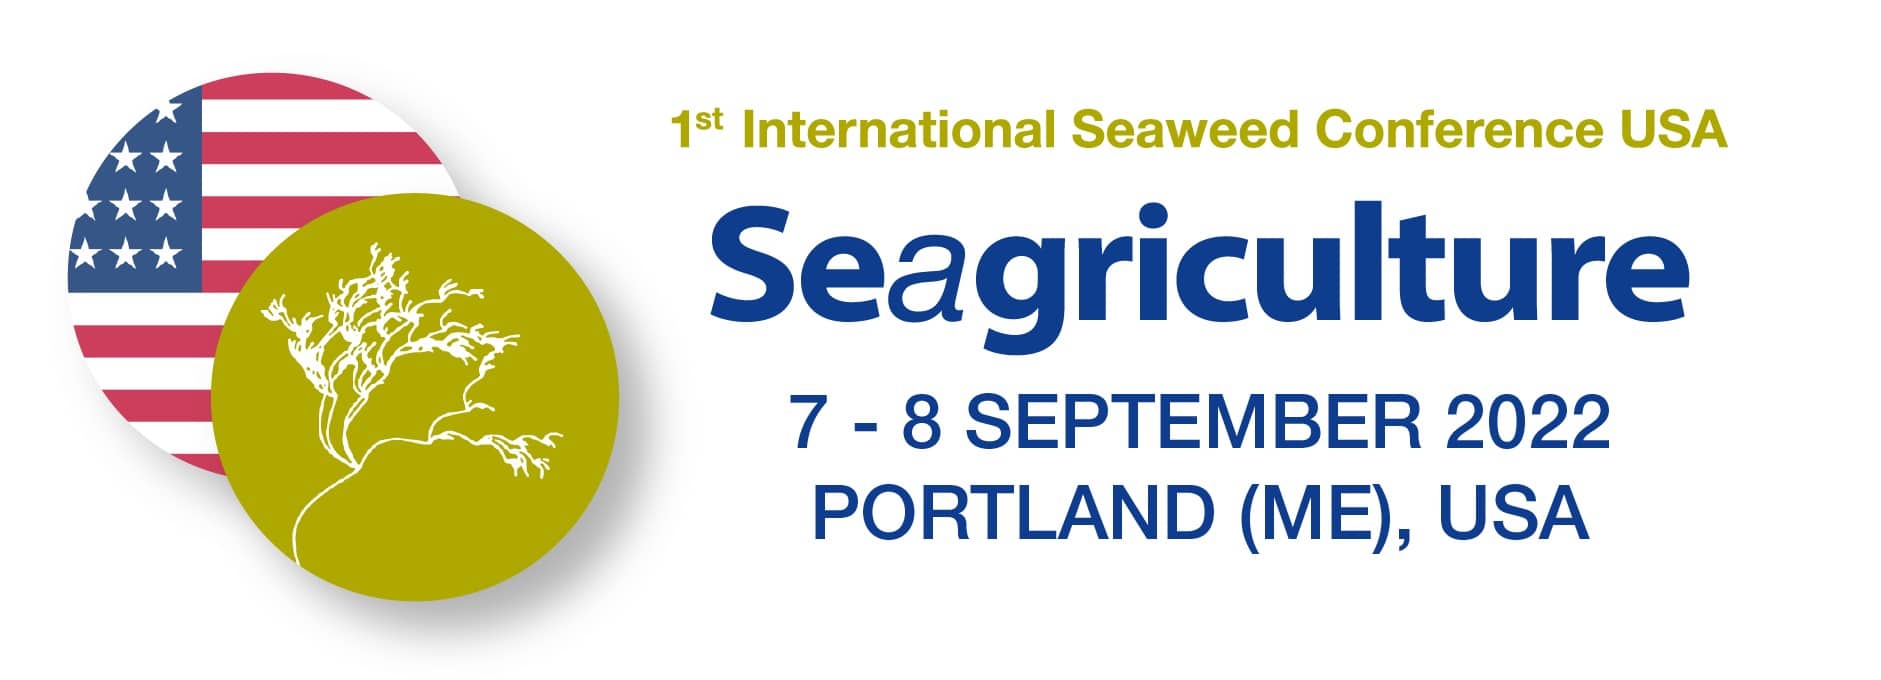 Seagriculture USA 2022 1st International Seaweed Conference USA